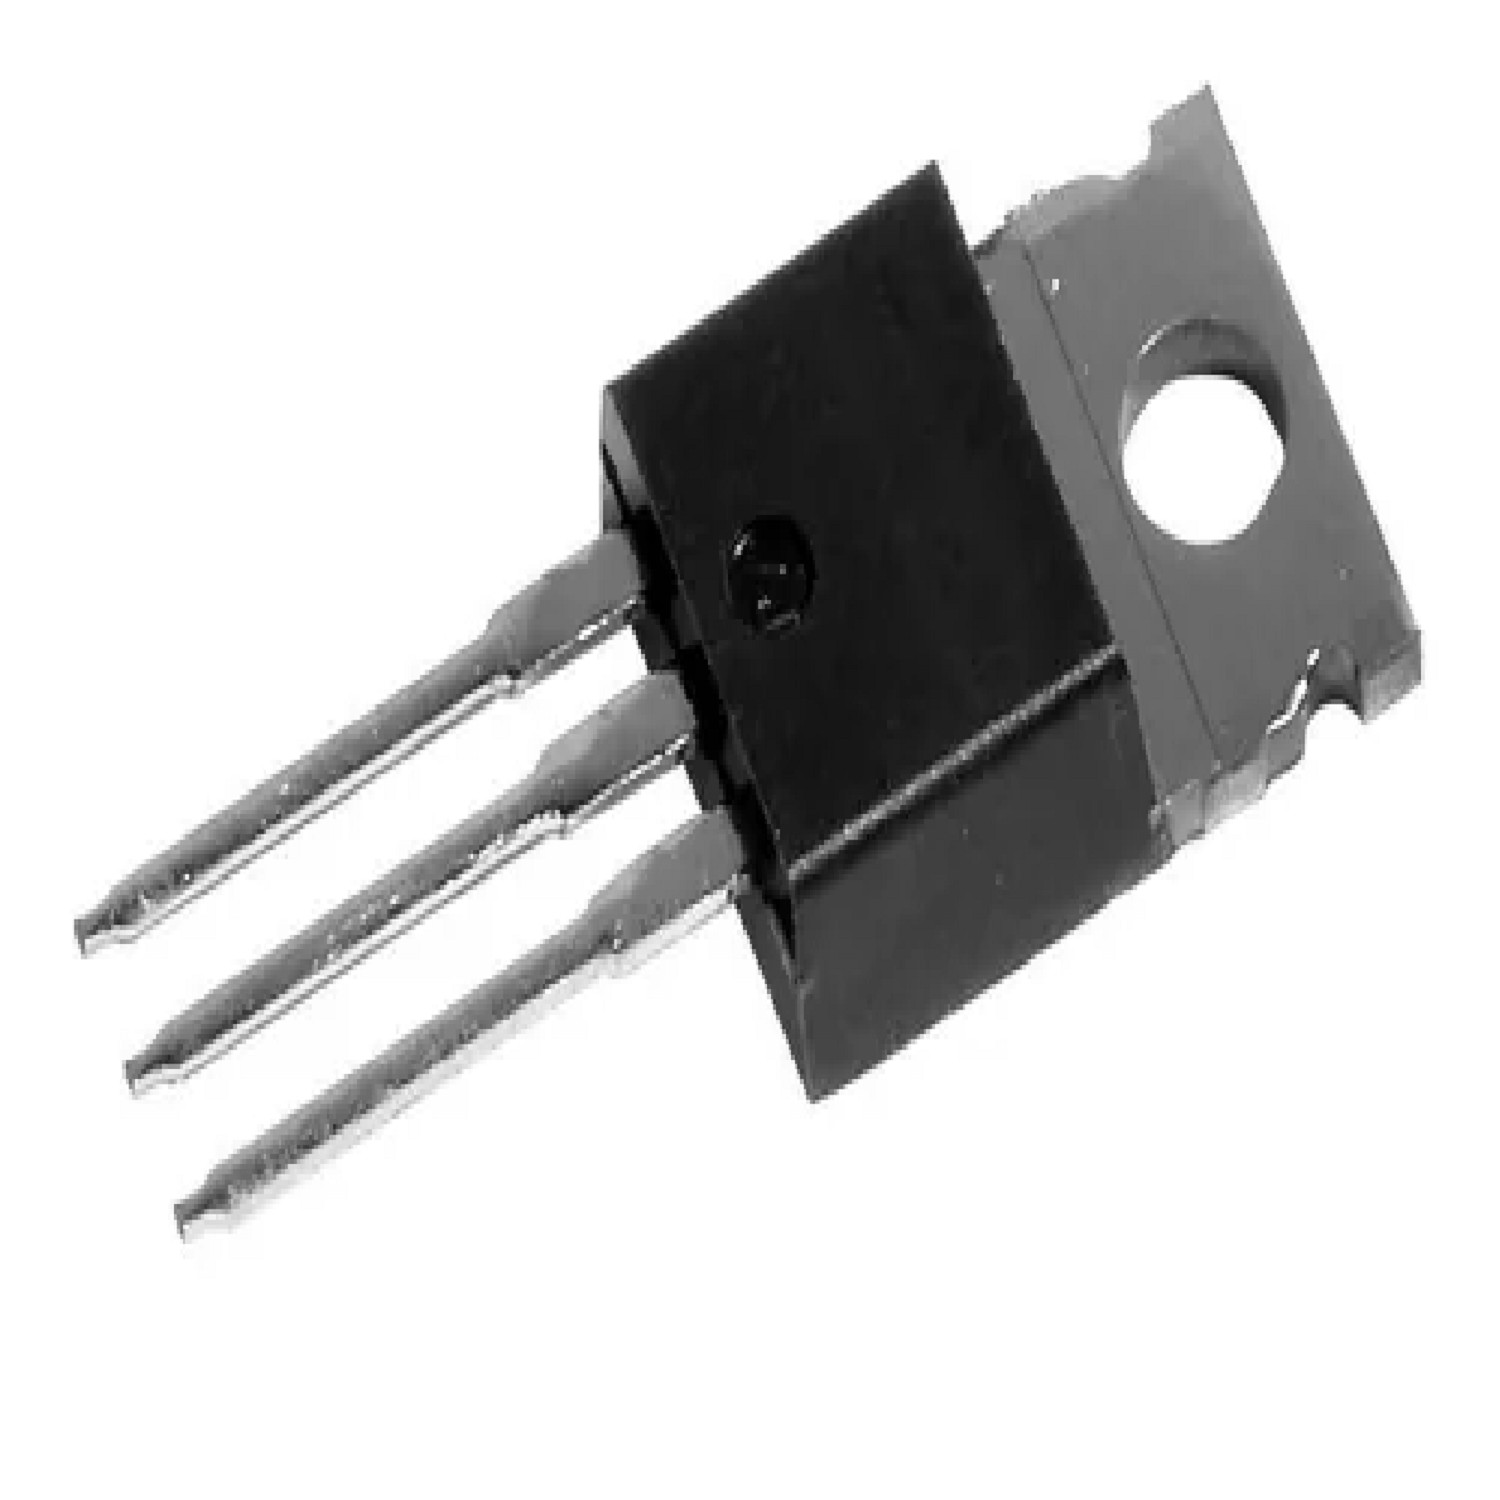 TRANSISTOR IRF822 FI MOSFET N-Channel Power MOSFET 3A/450V